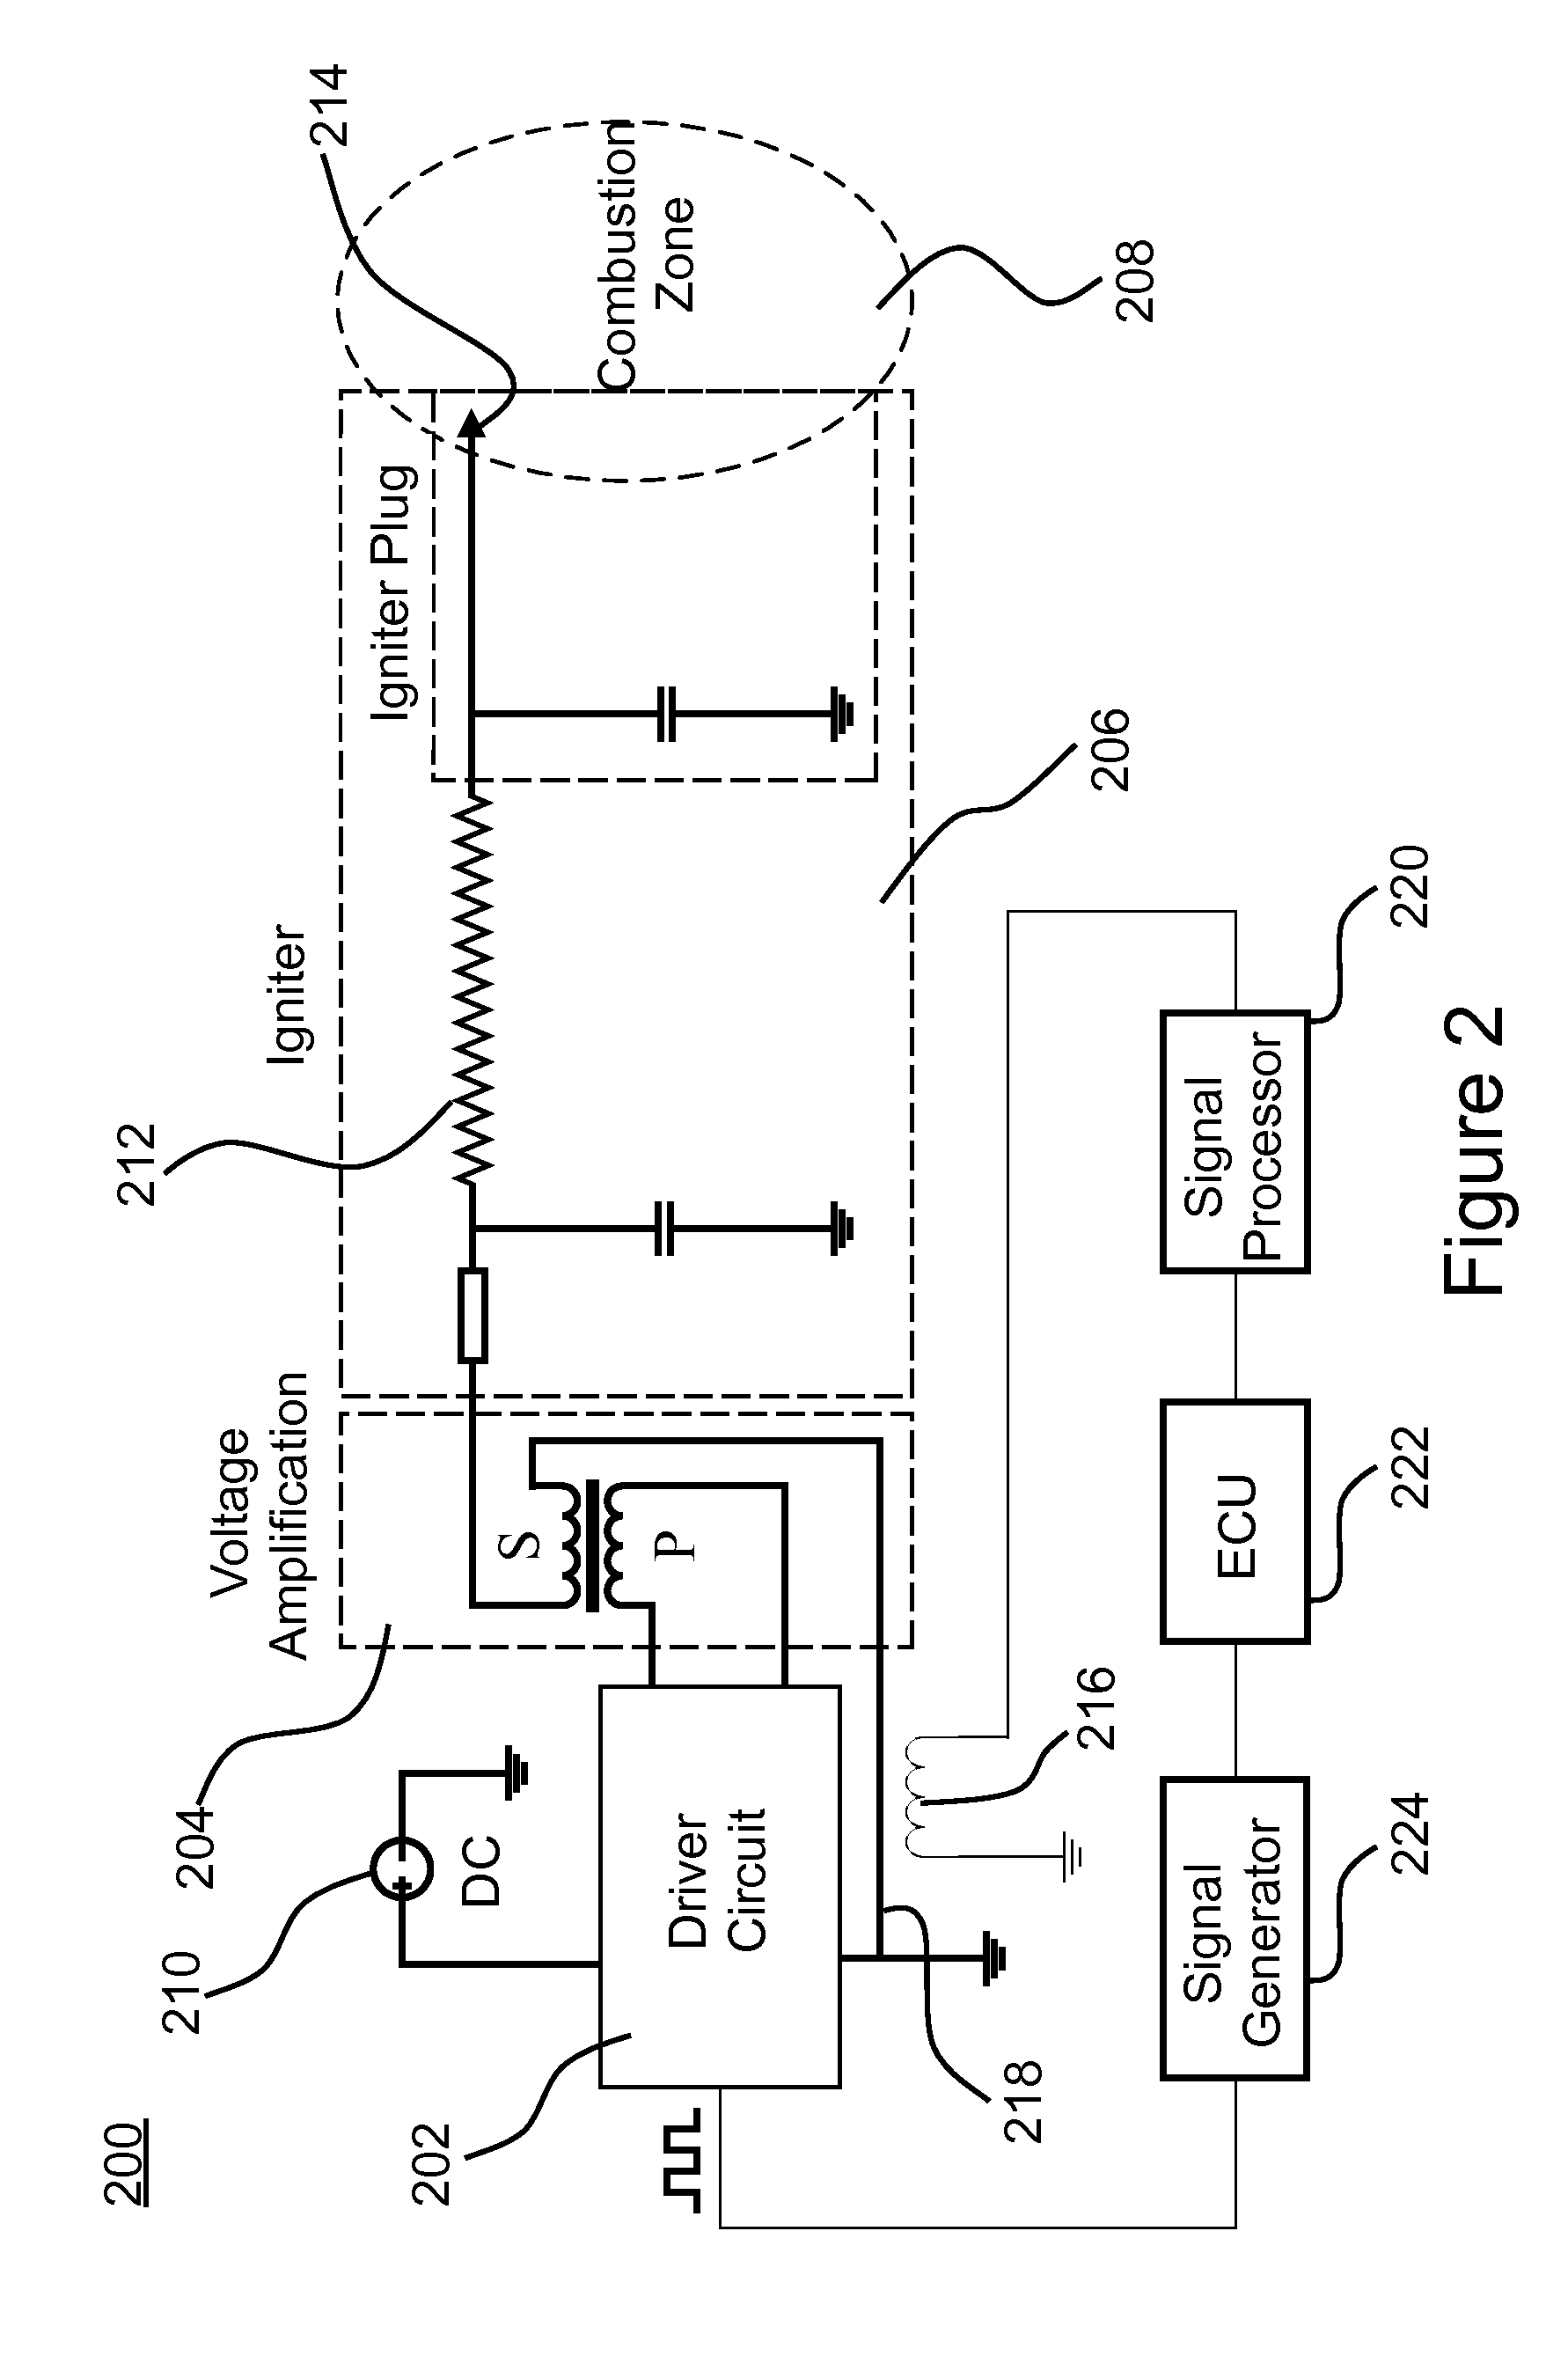 Active-control resonant ignition system